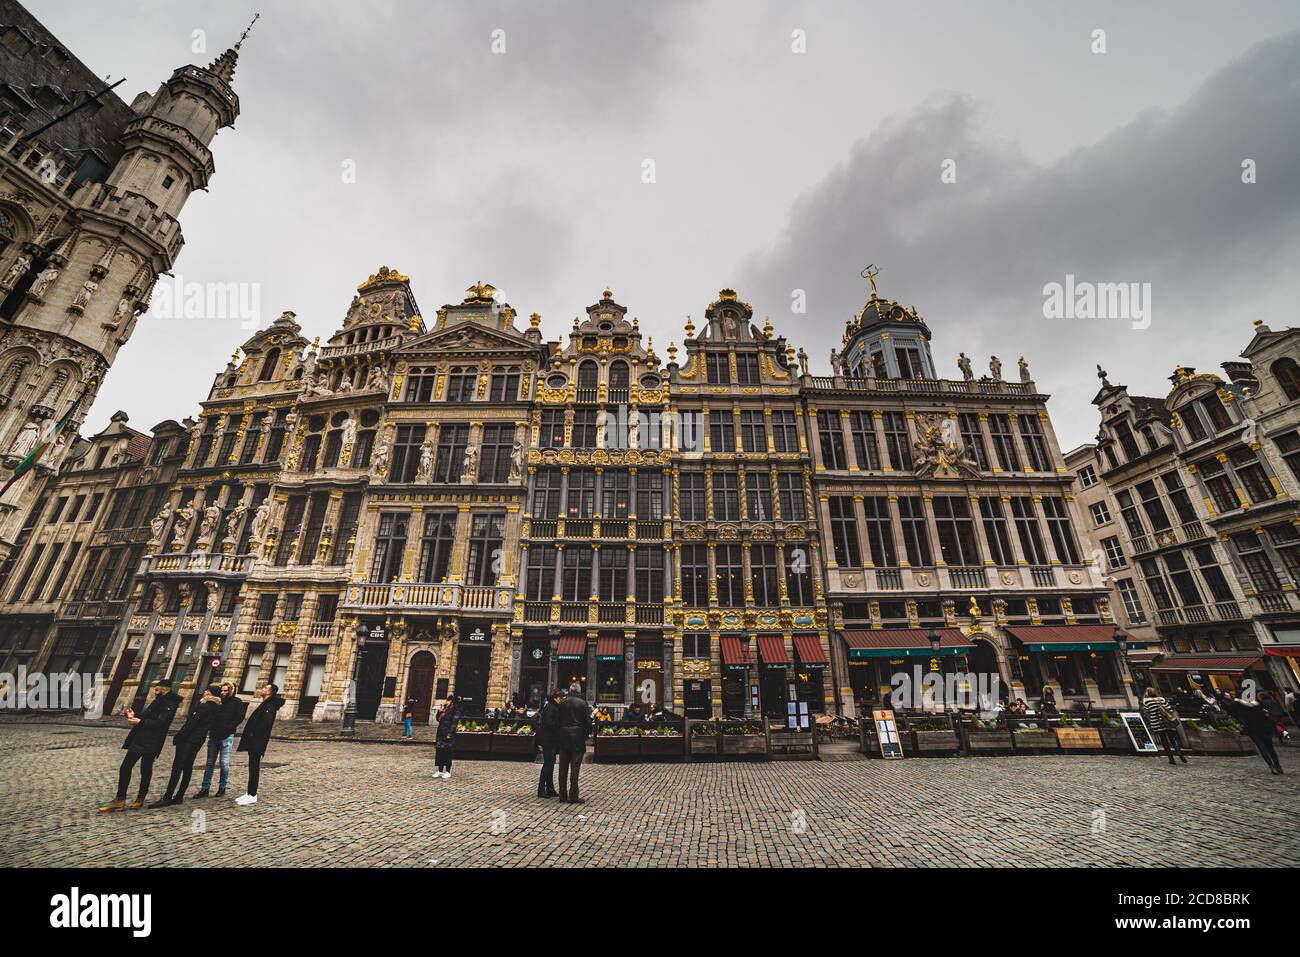 People standing by an opulent building facade or exterior in the noble Bruxelles Grand Place with its both Gothic and Baroque architecture - Brussels Stock Photo